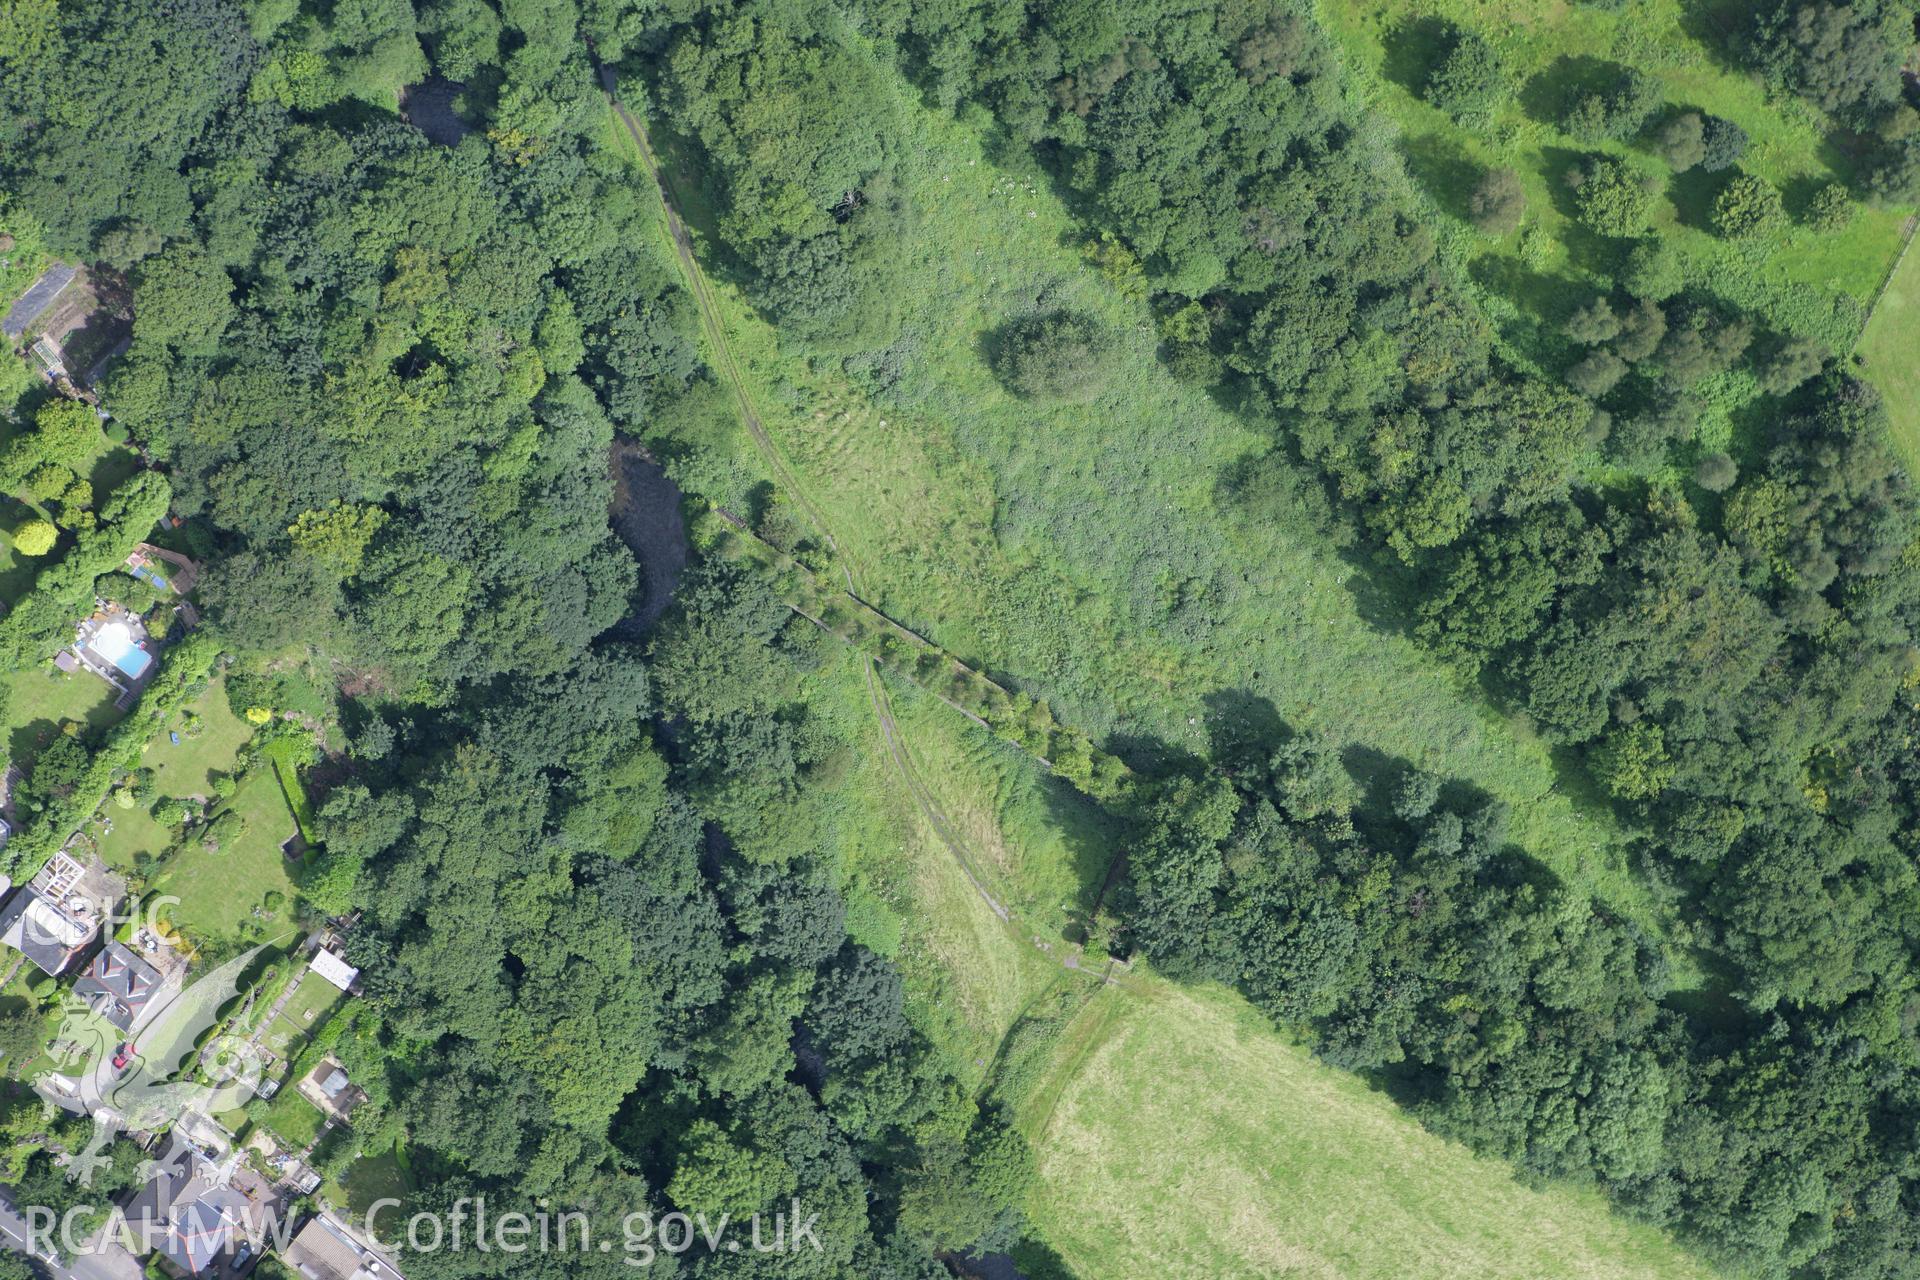 RCAHMW colour oblique aerial photograph of Machen Forge and Tinplate Works, Trethomas. Taken on 30 July 2007 by Toby Driver